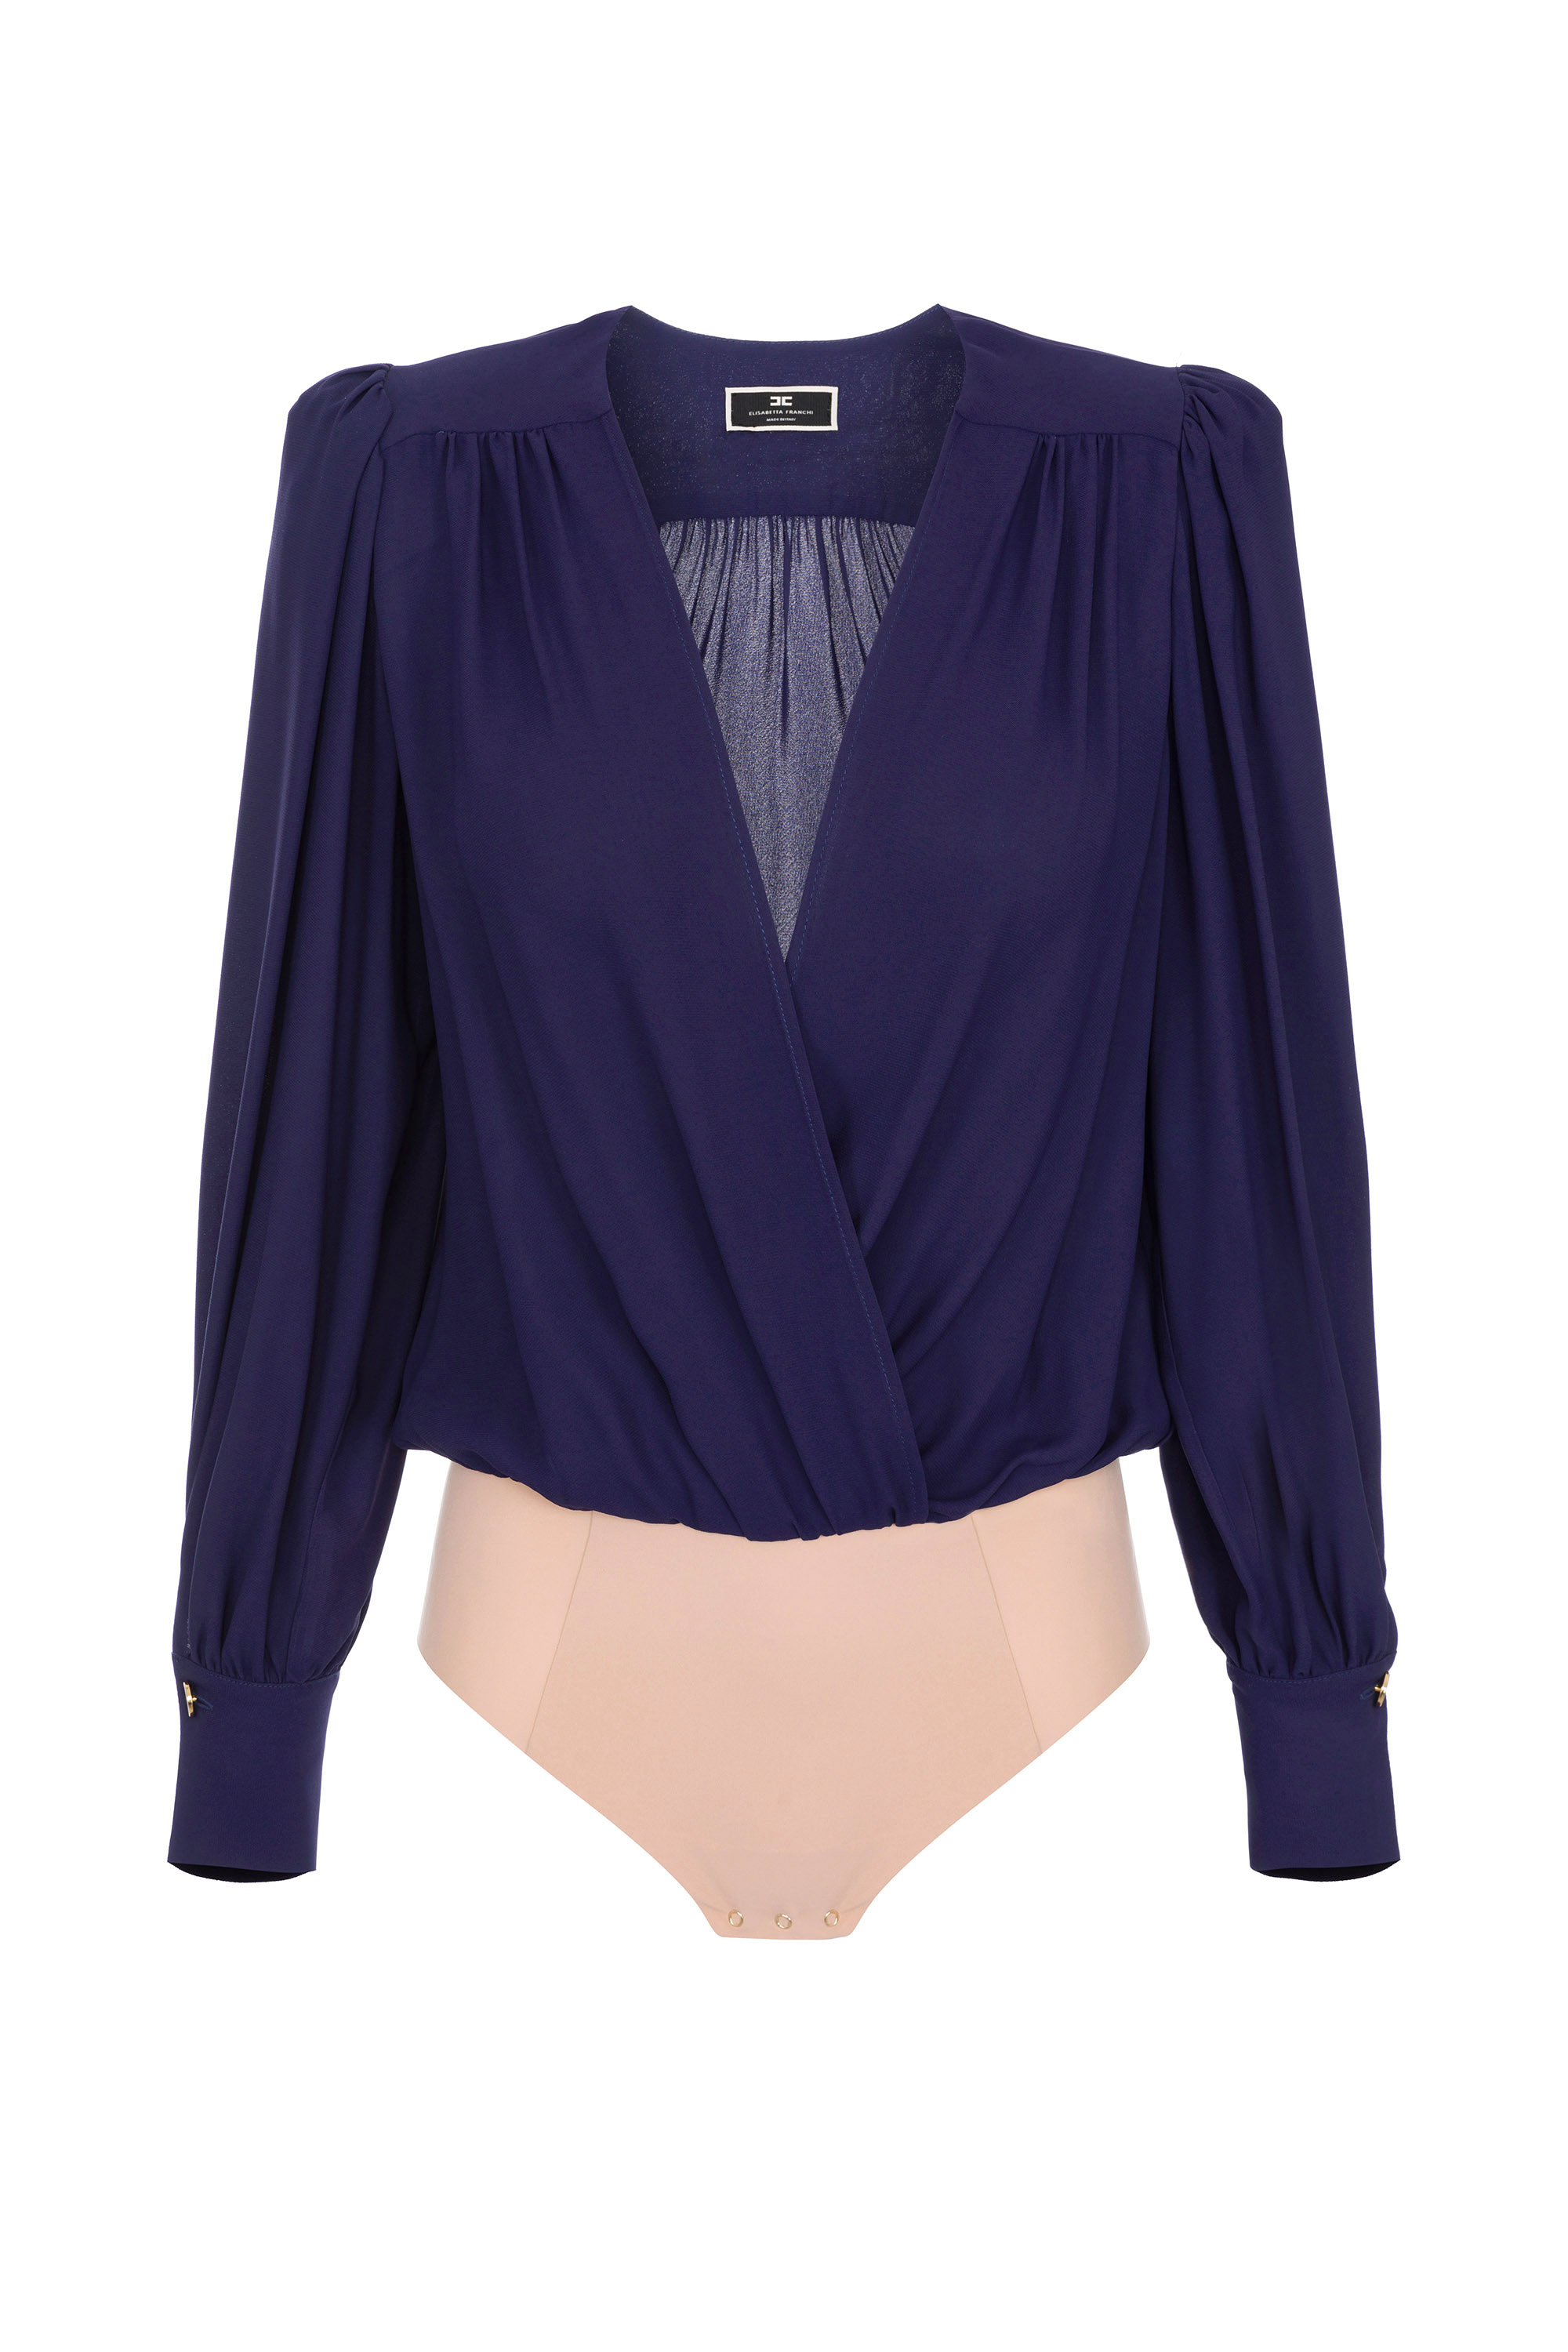 Draped bodysuit-style blouse in georgette fabric